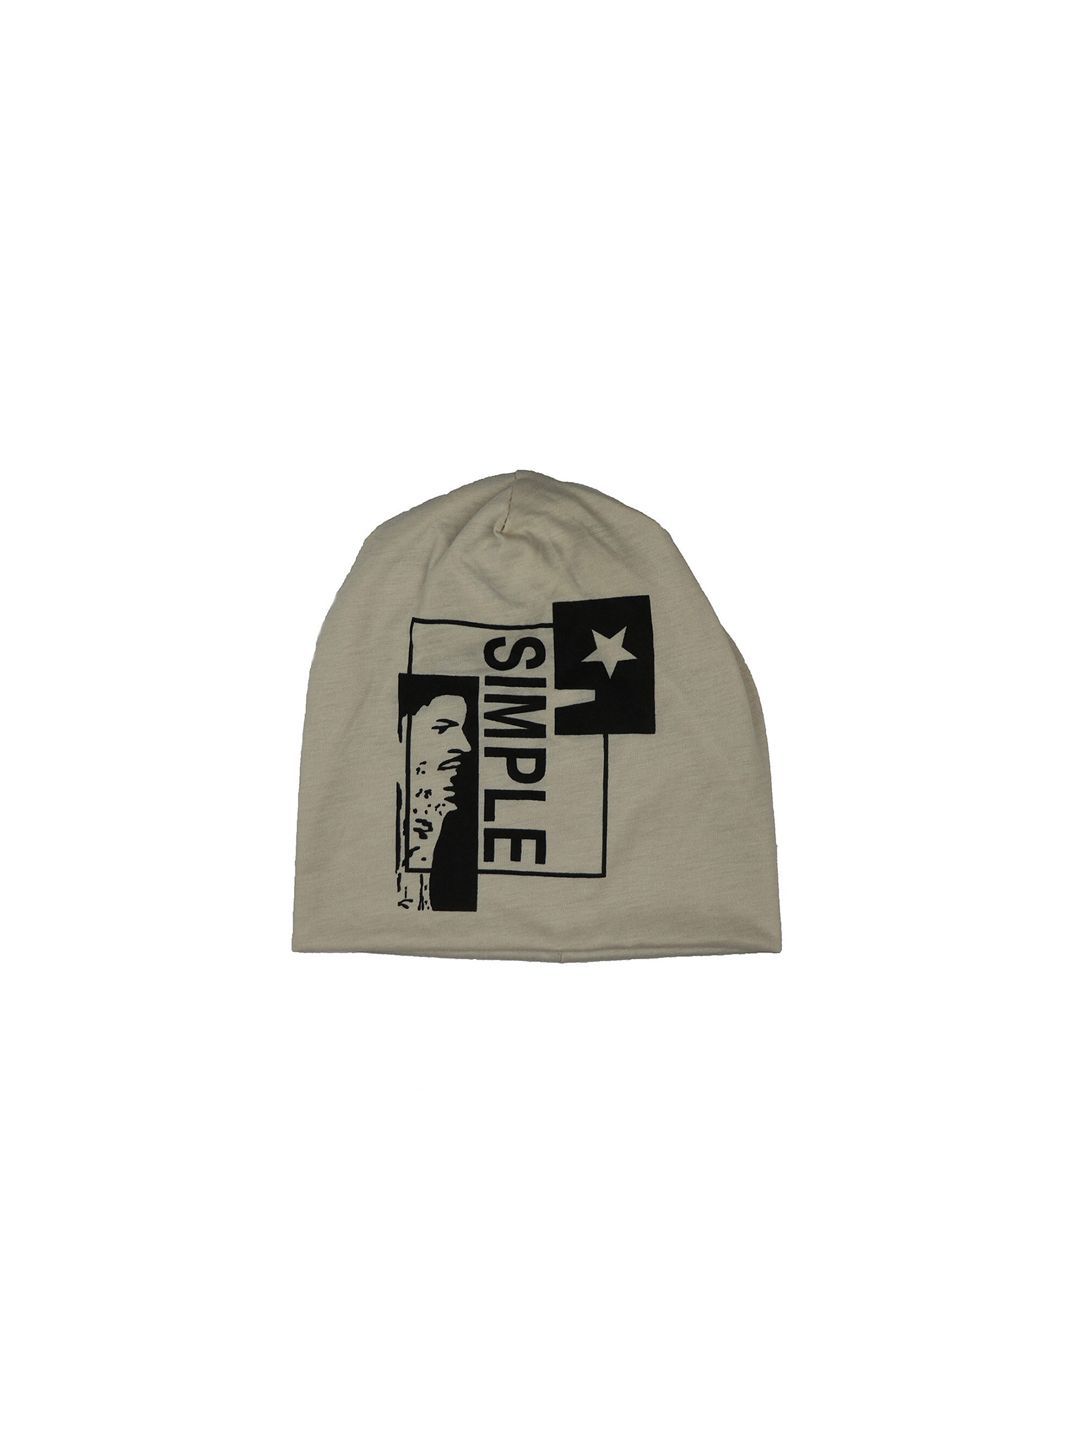 iSWEVEN Unisex Taupe-Coloured & Black Printed Beanie Price in India